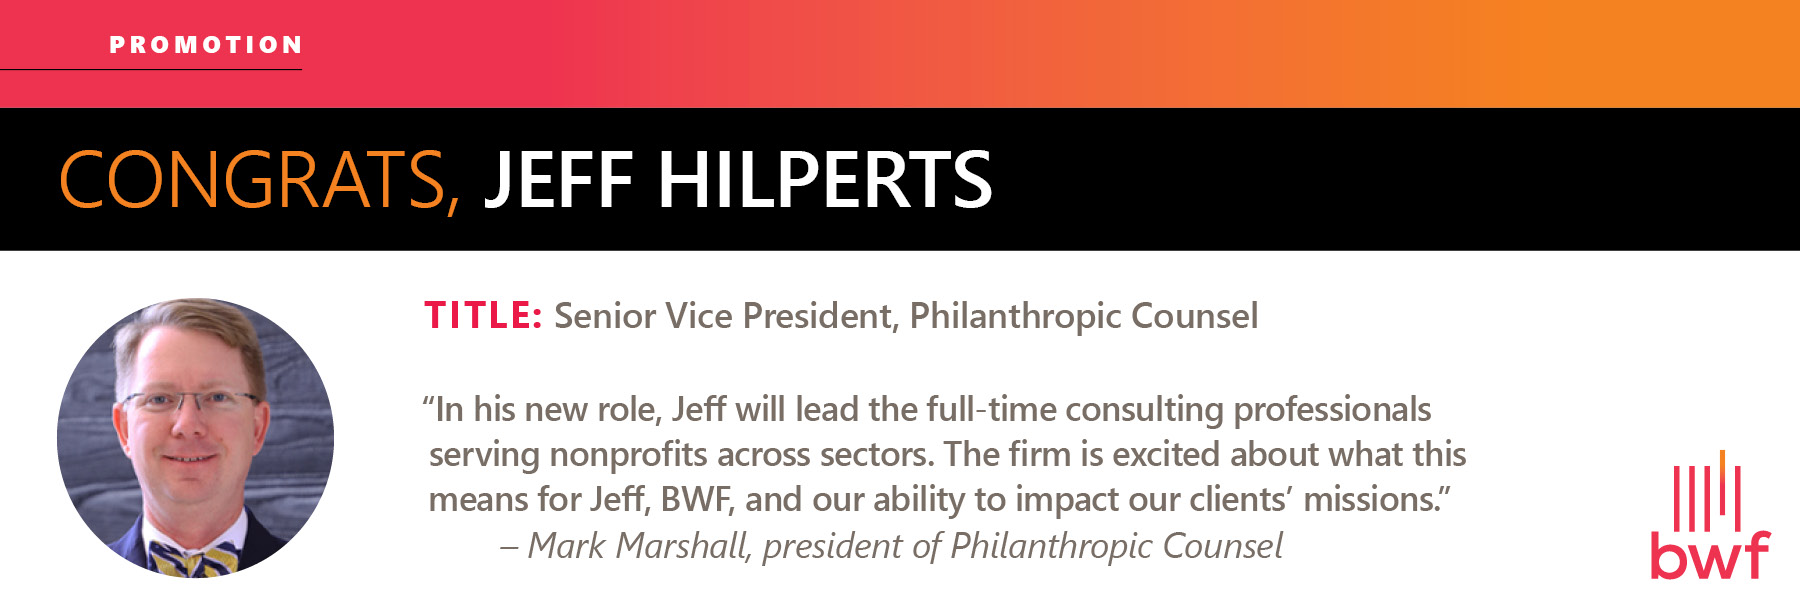 Jeff Hilperts Promoted to Senior Vice President, Philanthropic Counsel